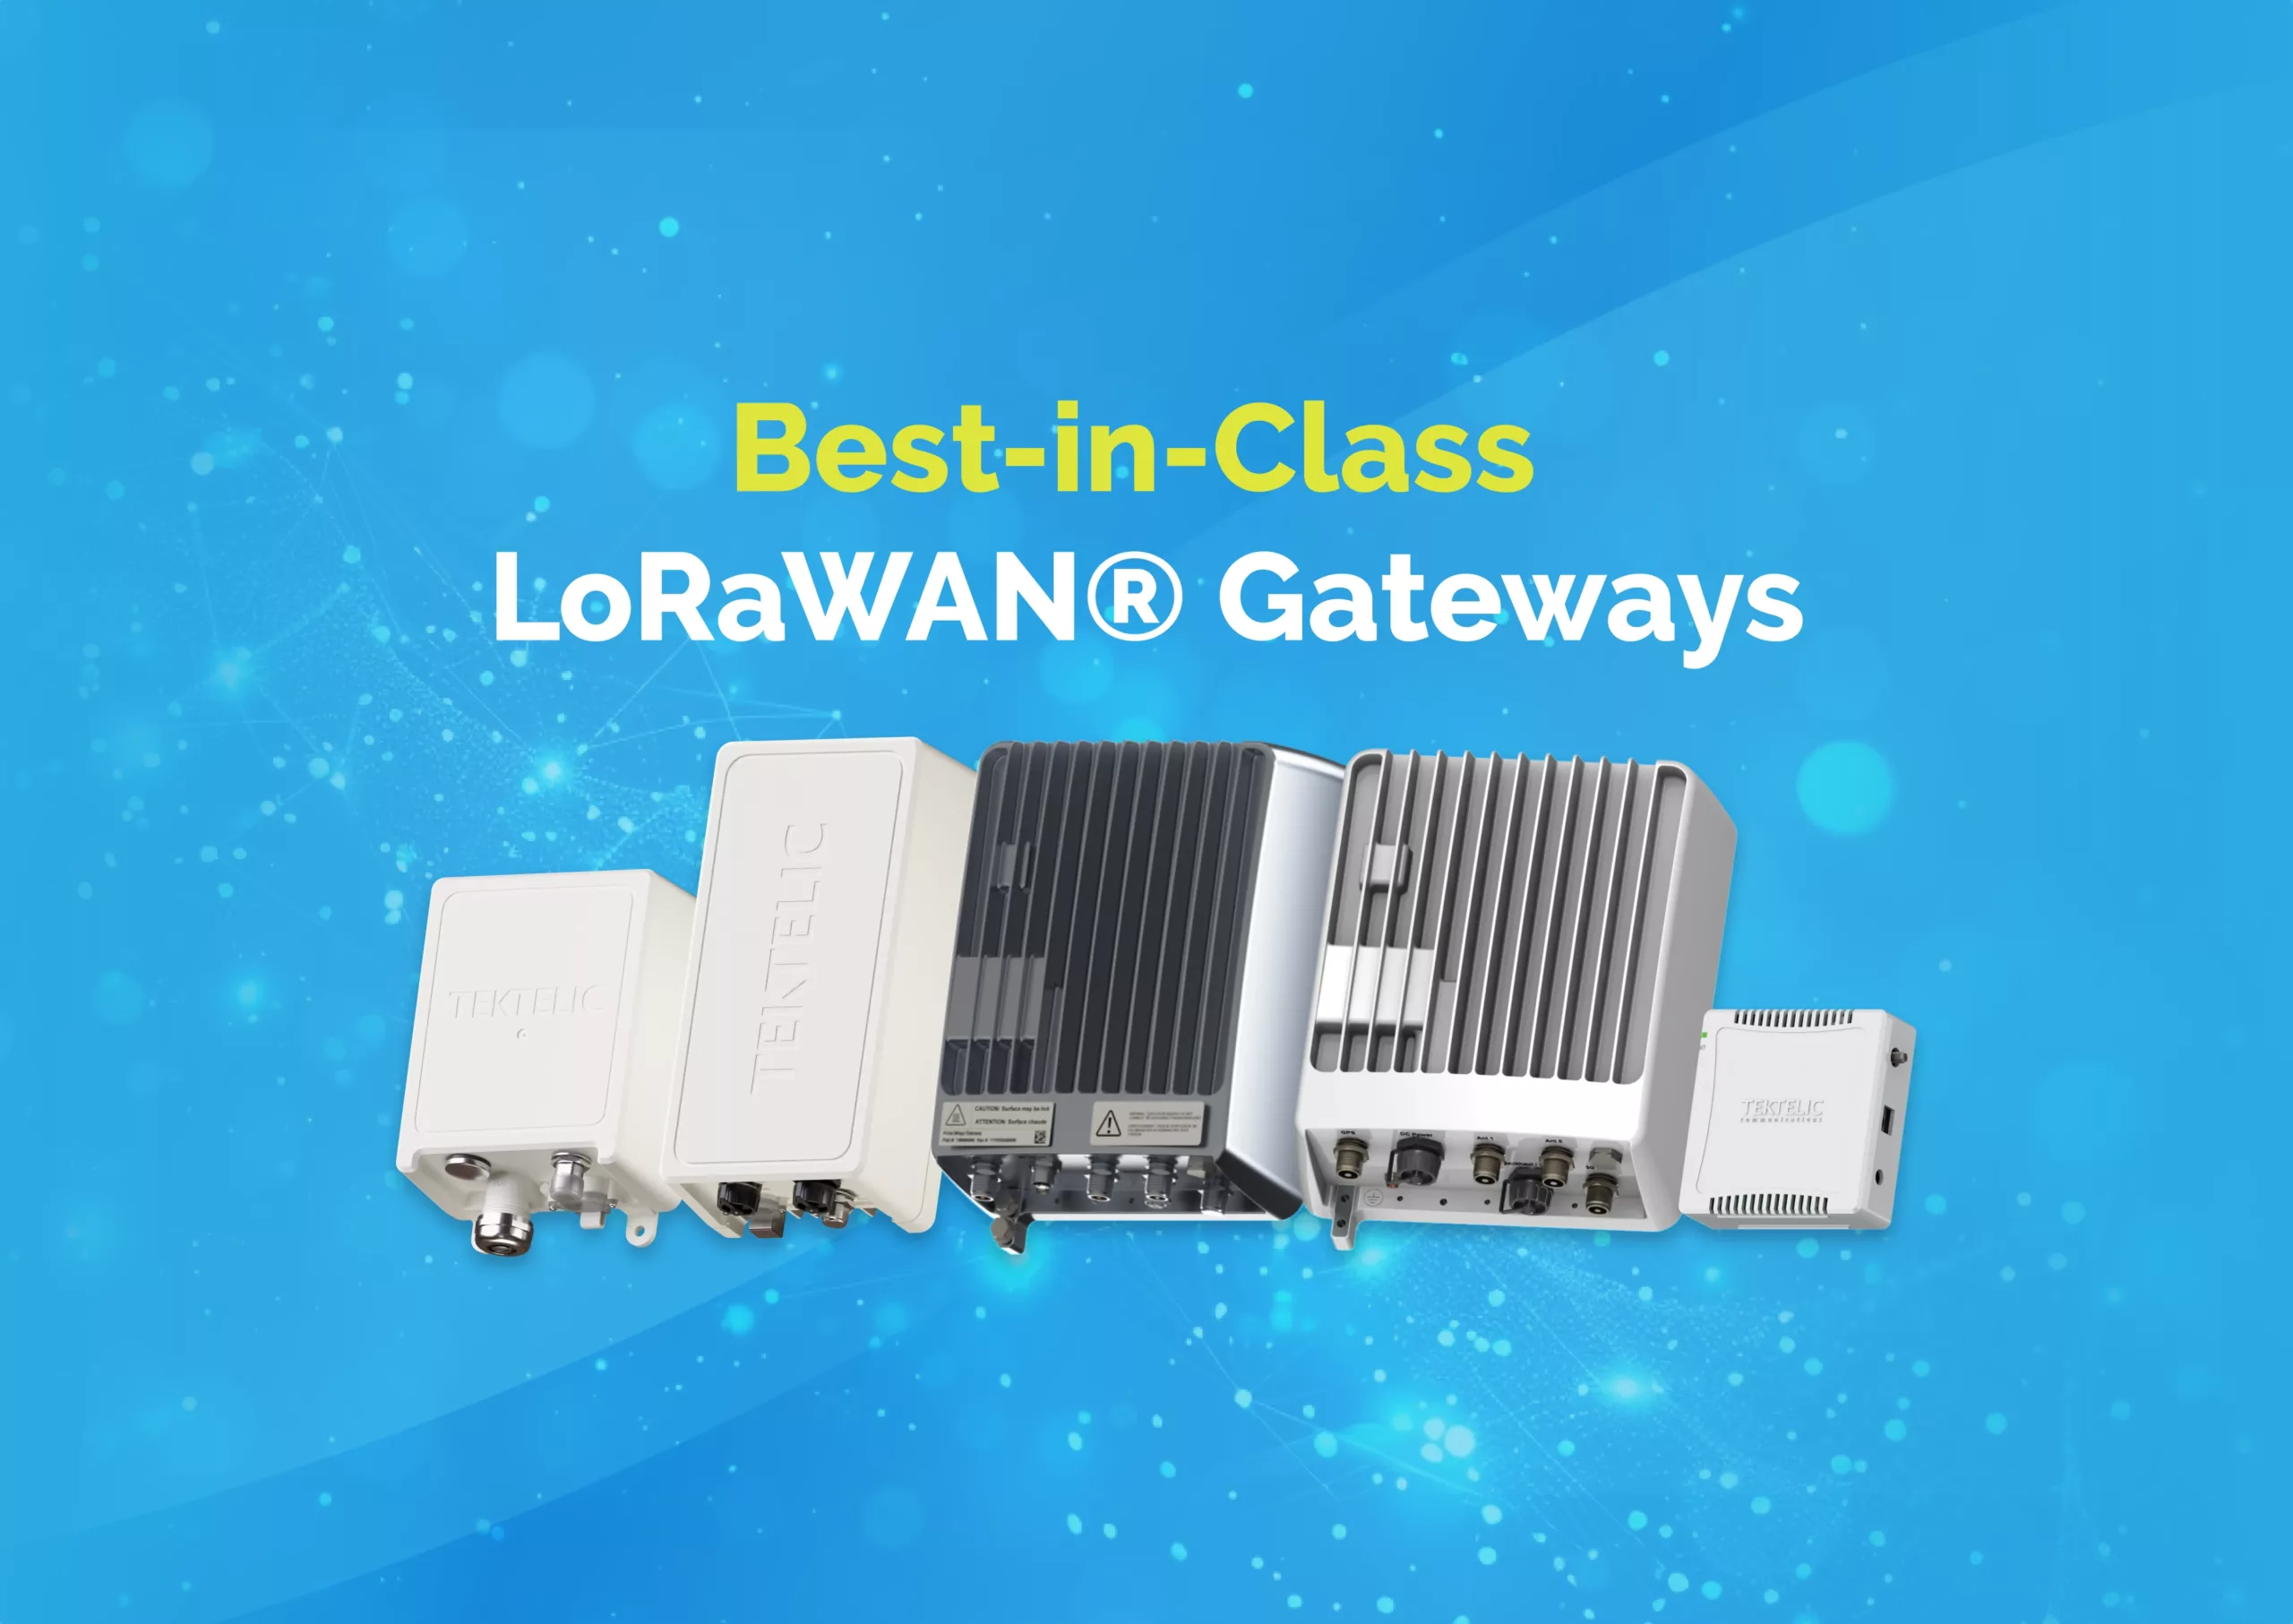 The best 10 LoRaWAN® Gateways selected by Technicians with 2 Decades of Experience